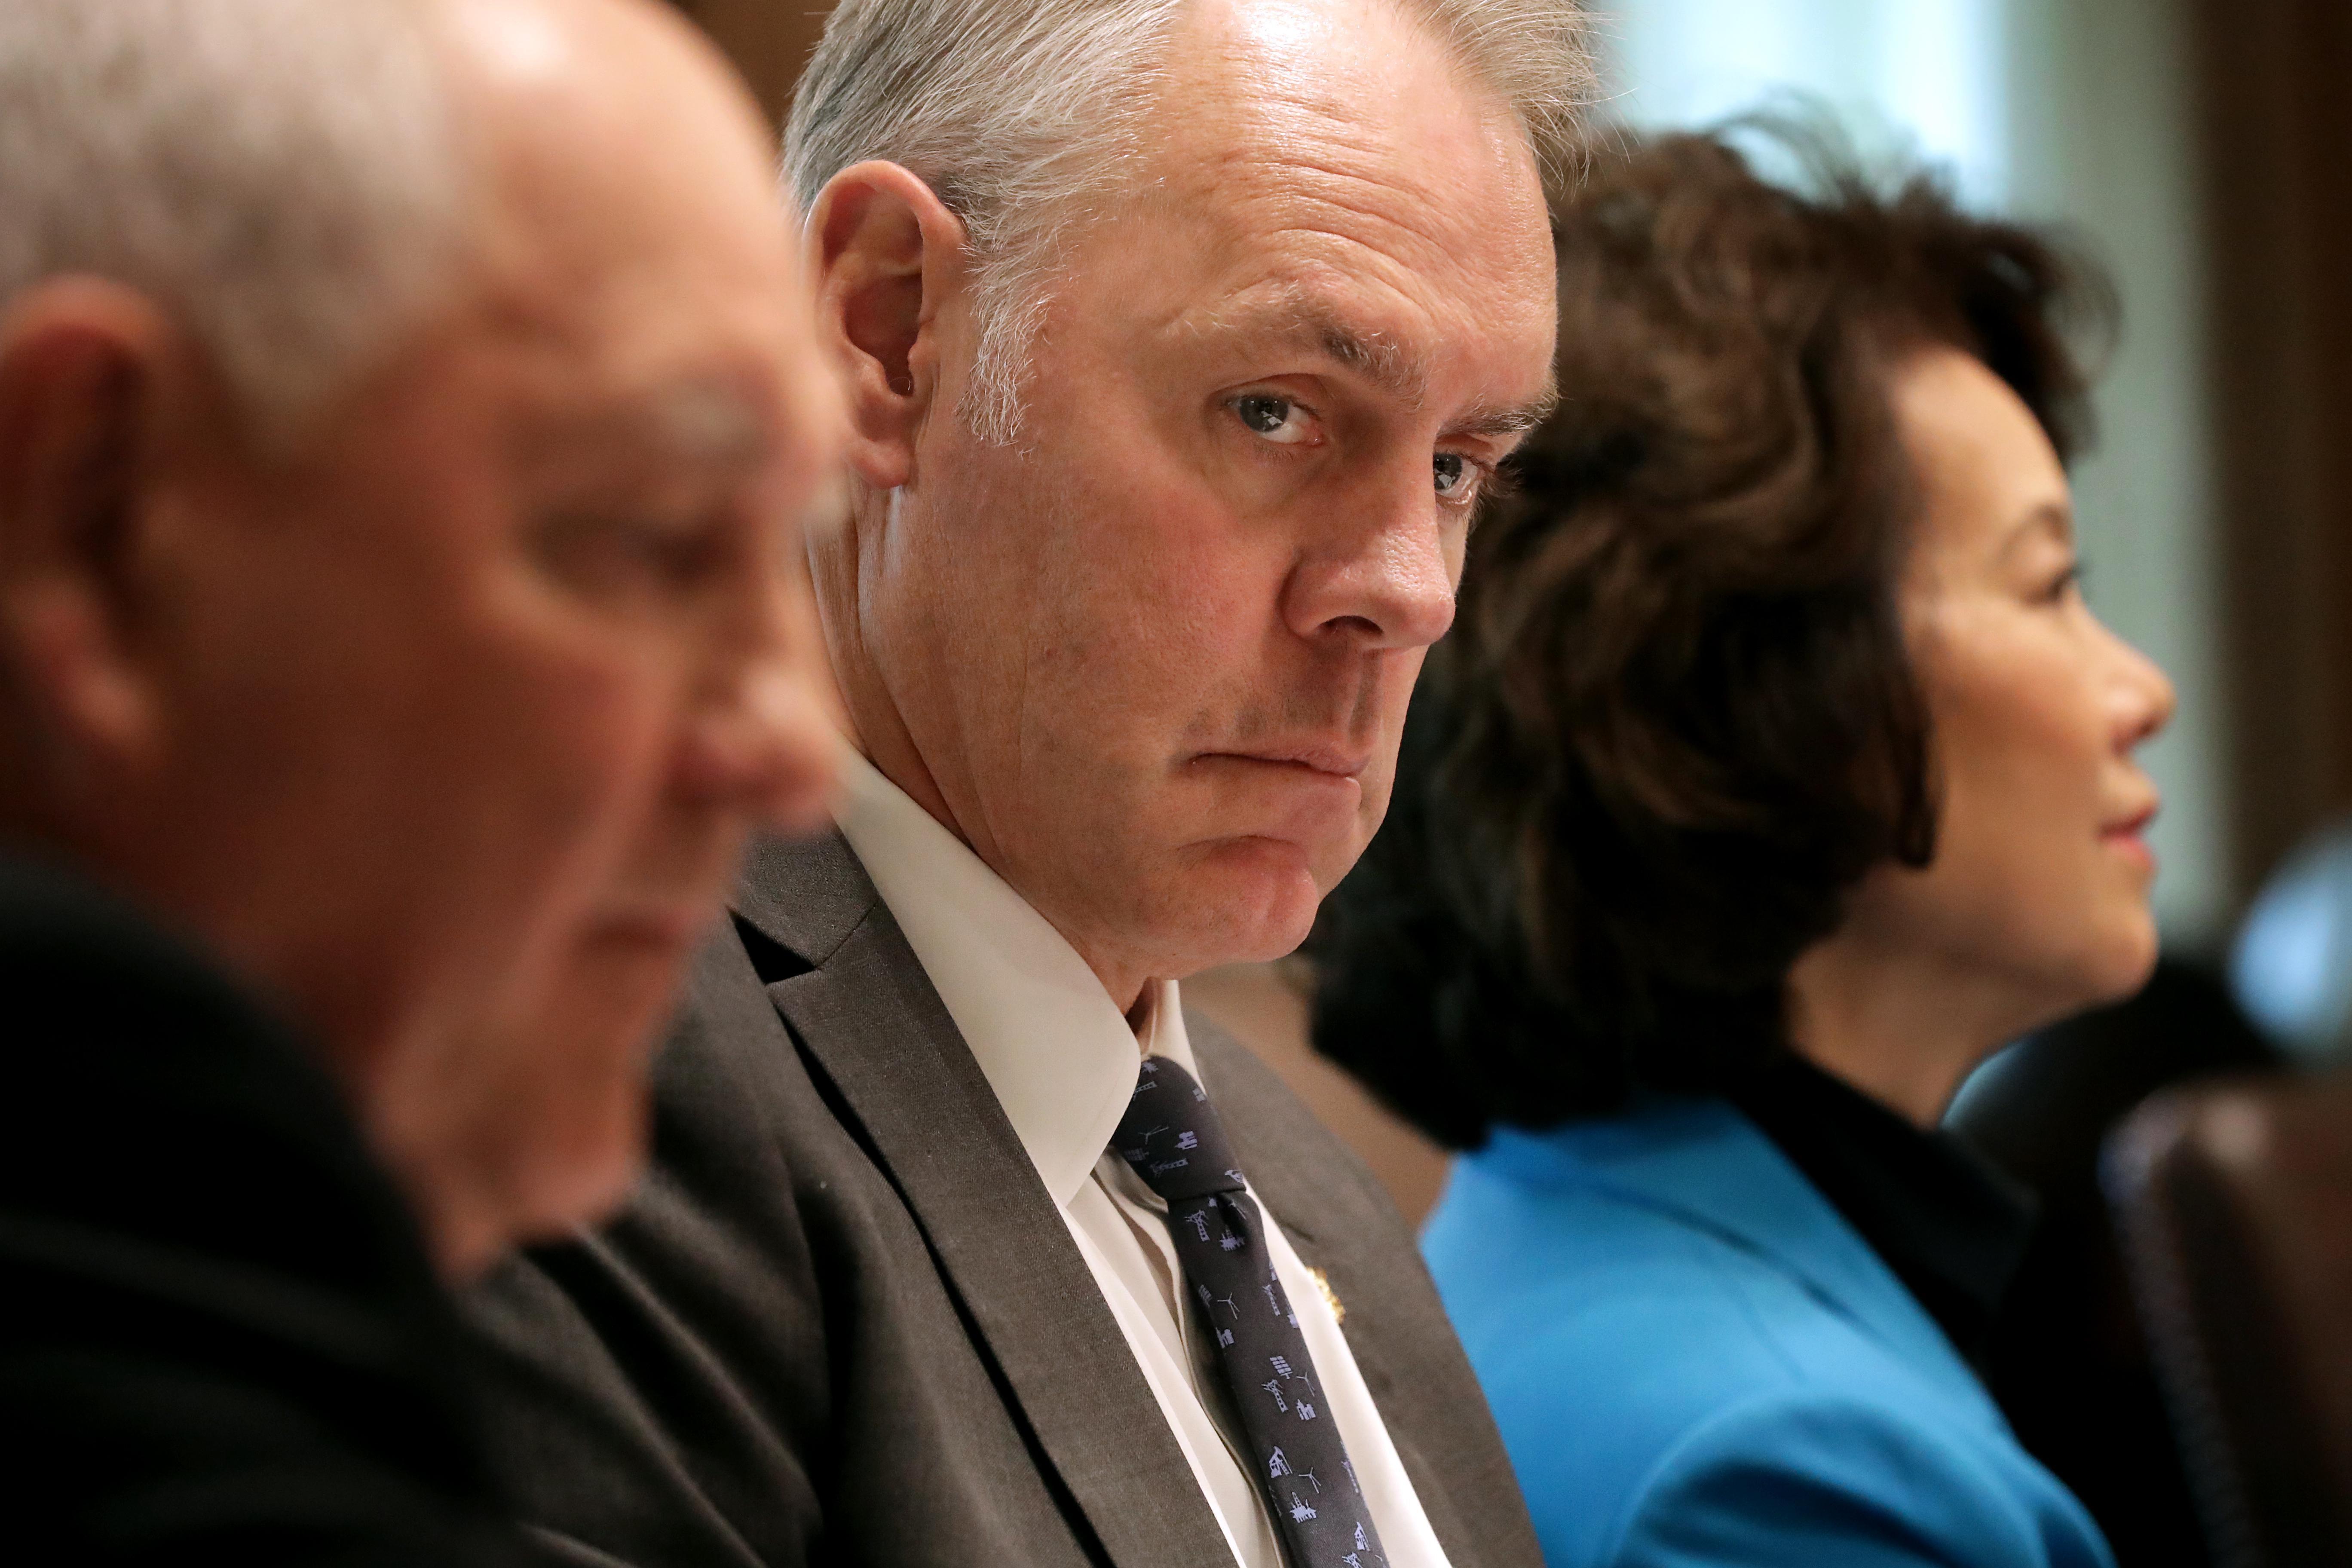 Ryan Zinke at a cabinet meeting in the White House 